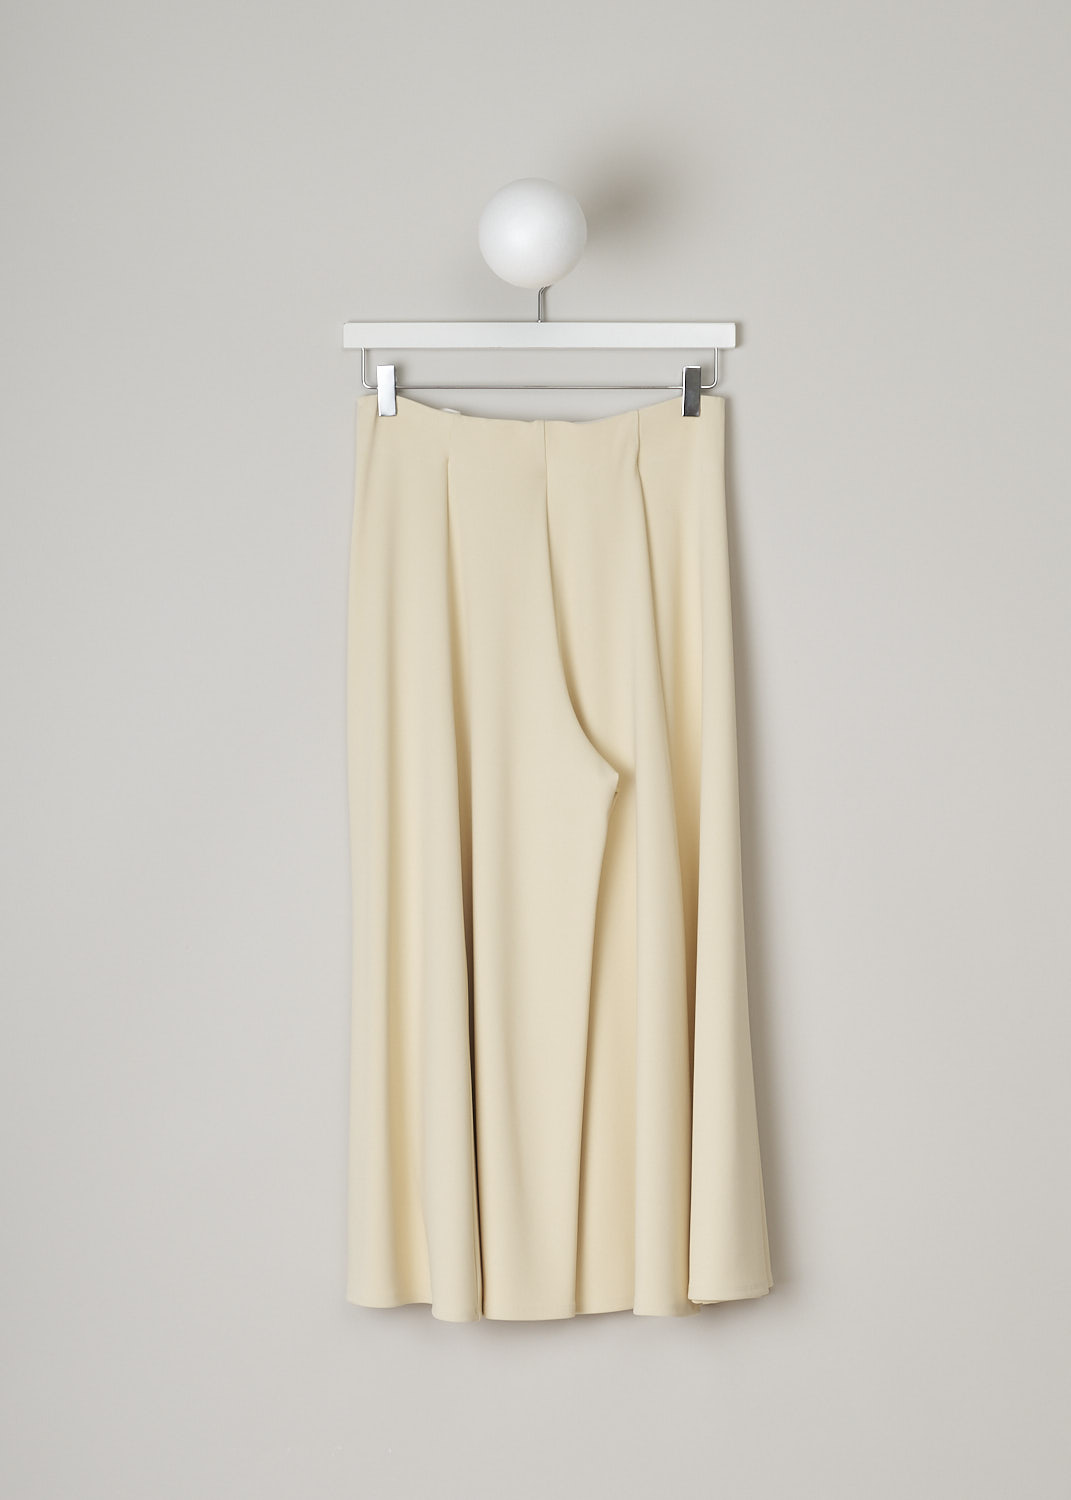 THE ROW, LIGHT CREAM MILDRO PANTS, MILDRO_PANTS_3995K31_3_LIGHT_CREAM, Beige, Back, These Light Cream high-waisted culotte pants are elasticated throughout with a broad elasticated waistband. These pants have cropped flared pants legs.
